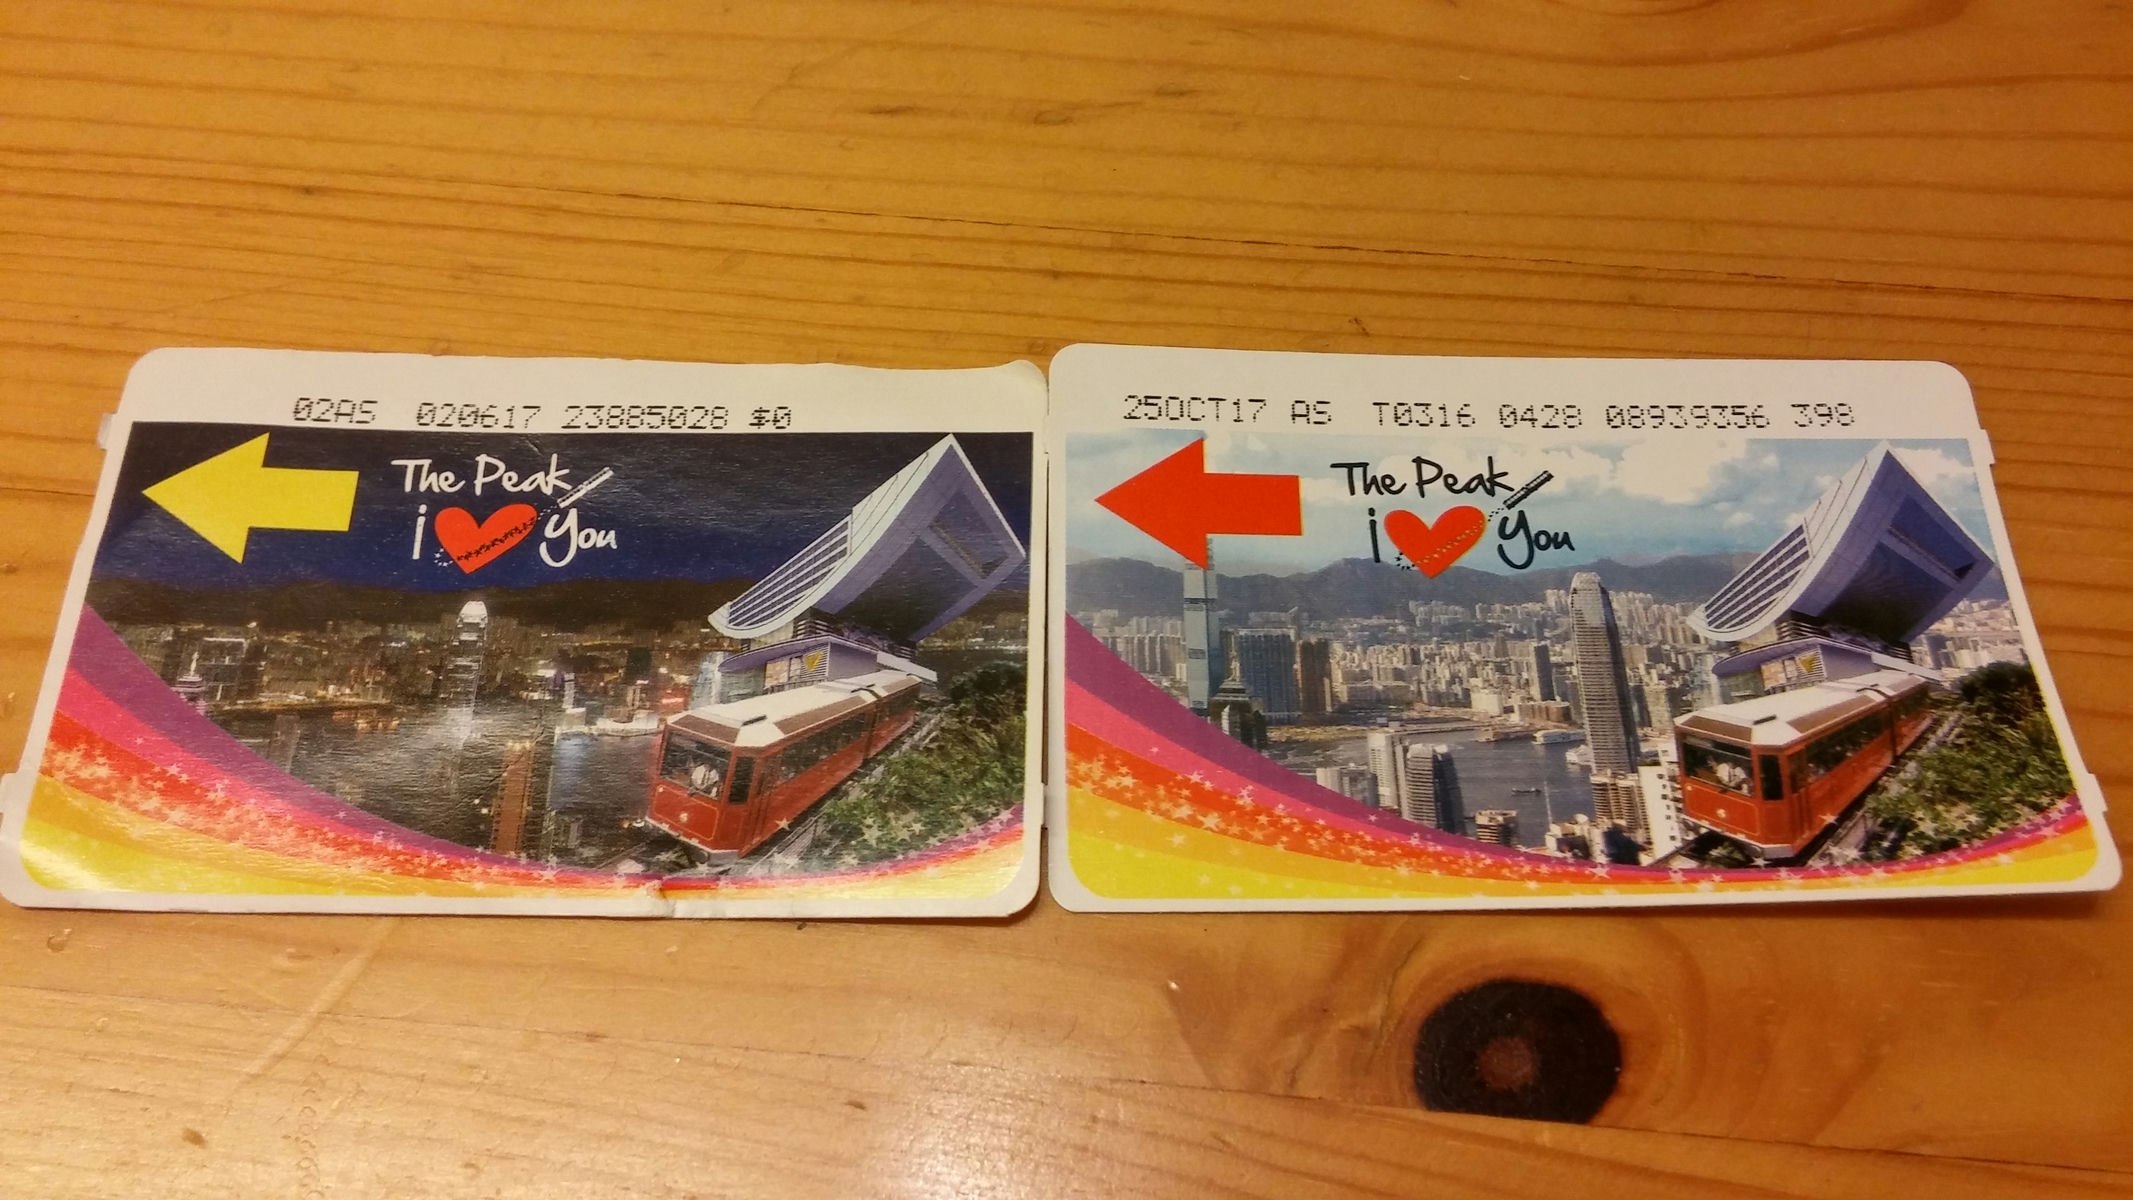 Peak Tram ticket is better than the Octopus Card